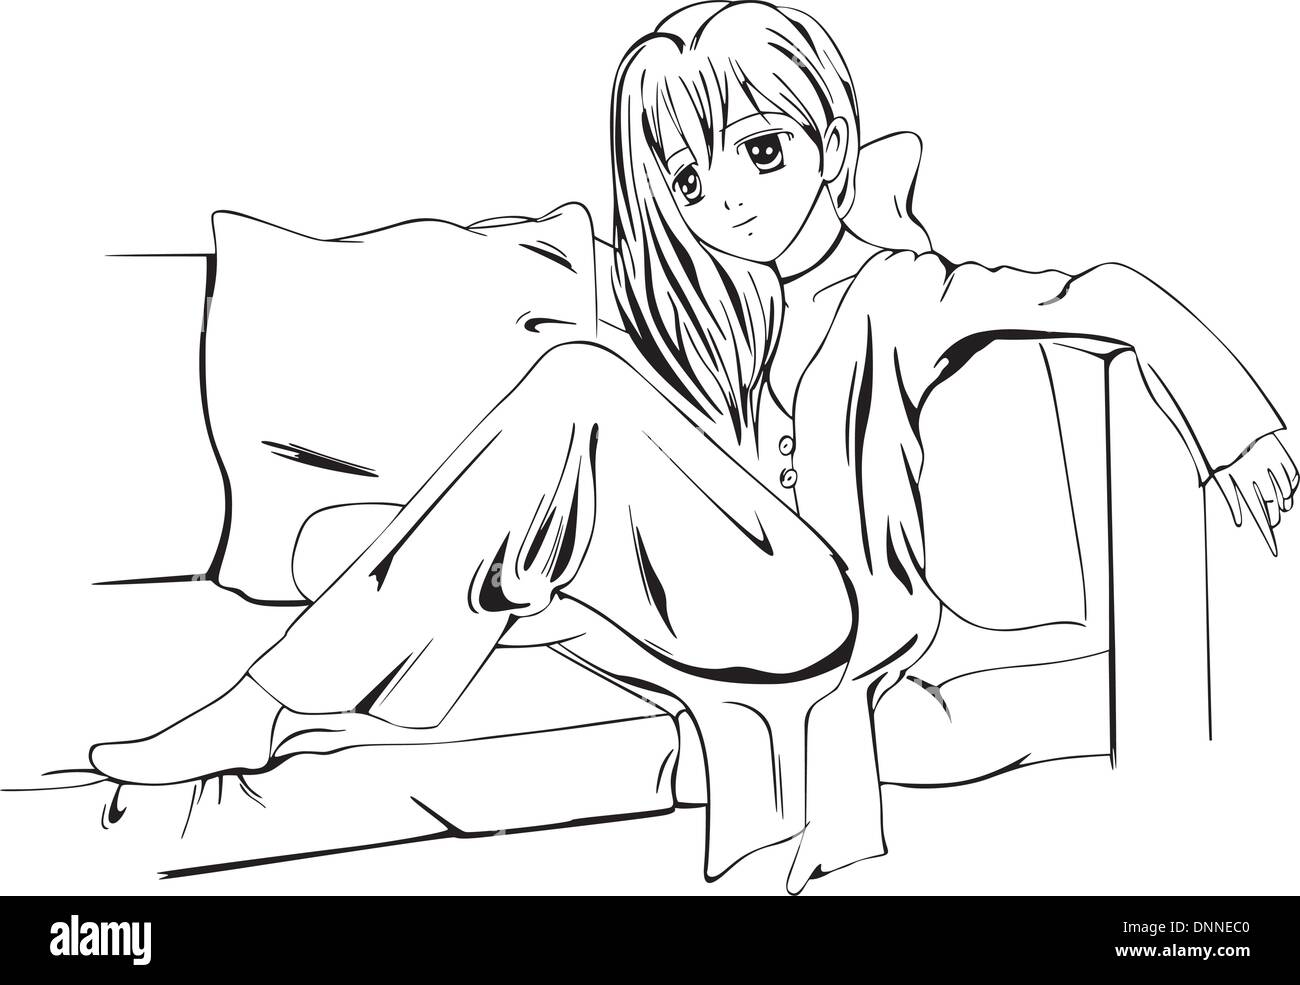 Anime Girl Sitting and Thinking